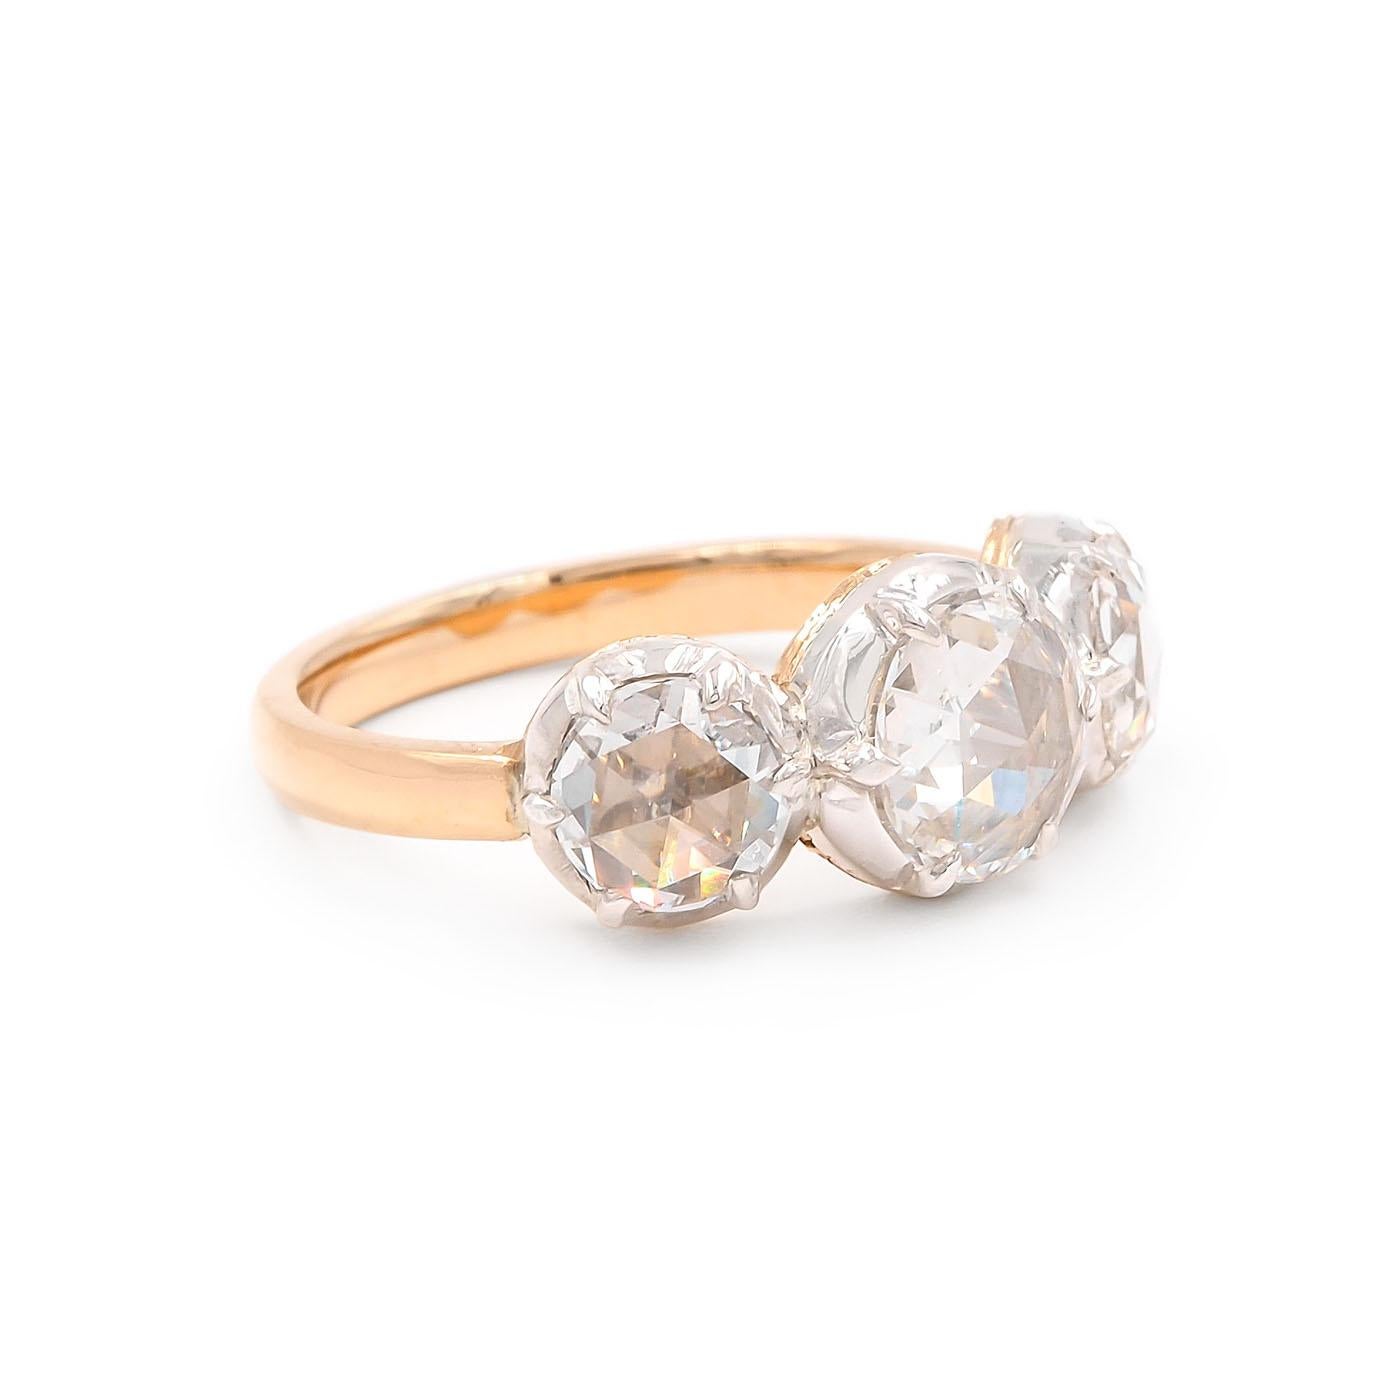 Victorian-Inspired 1.66 Ctw. Rose Cut Diamond 3-Stone Ring from Bespoke by Platt, composed of 18k yellow gold and silver. The 3 reclaimed Rose Cut diamonds weigh approximately 1.66 carats in total (a 0.75 carat diamond at the center, flanked by a